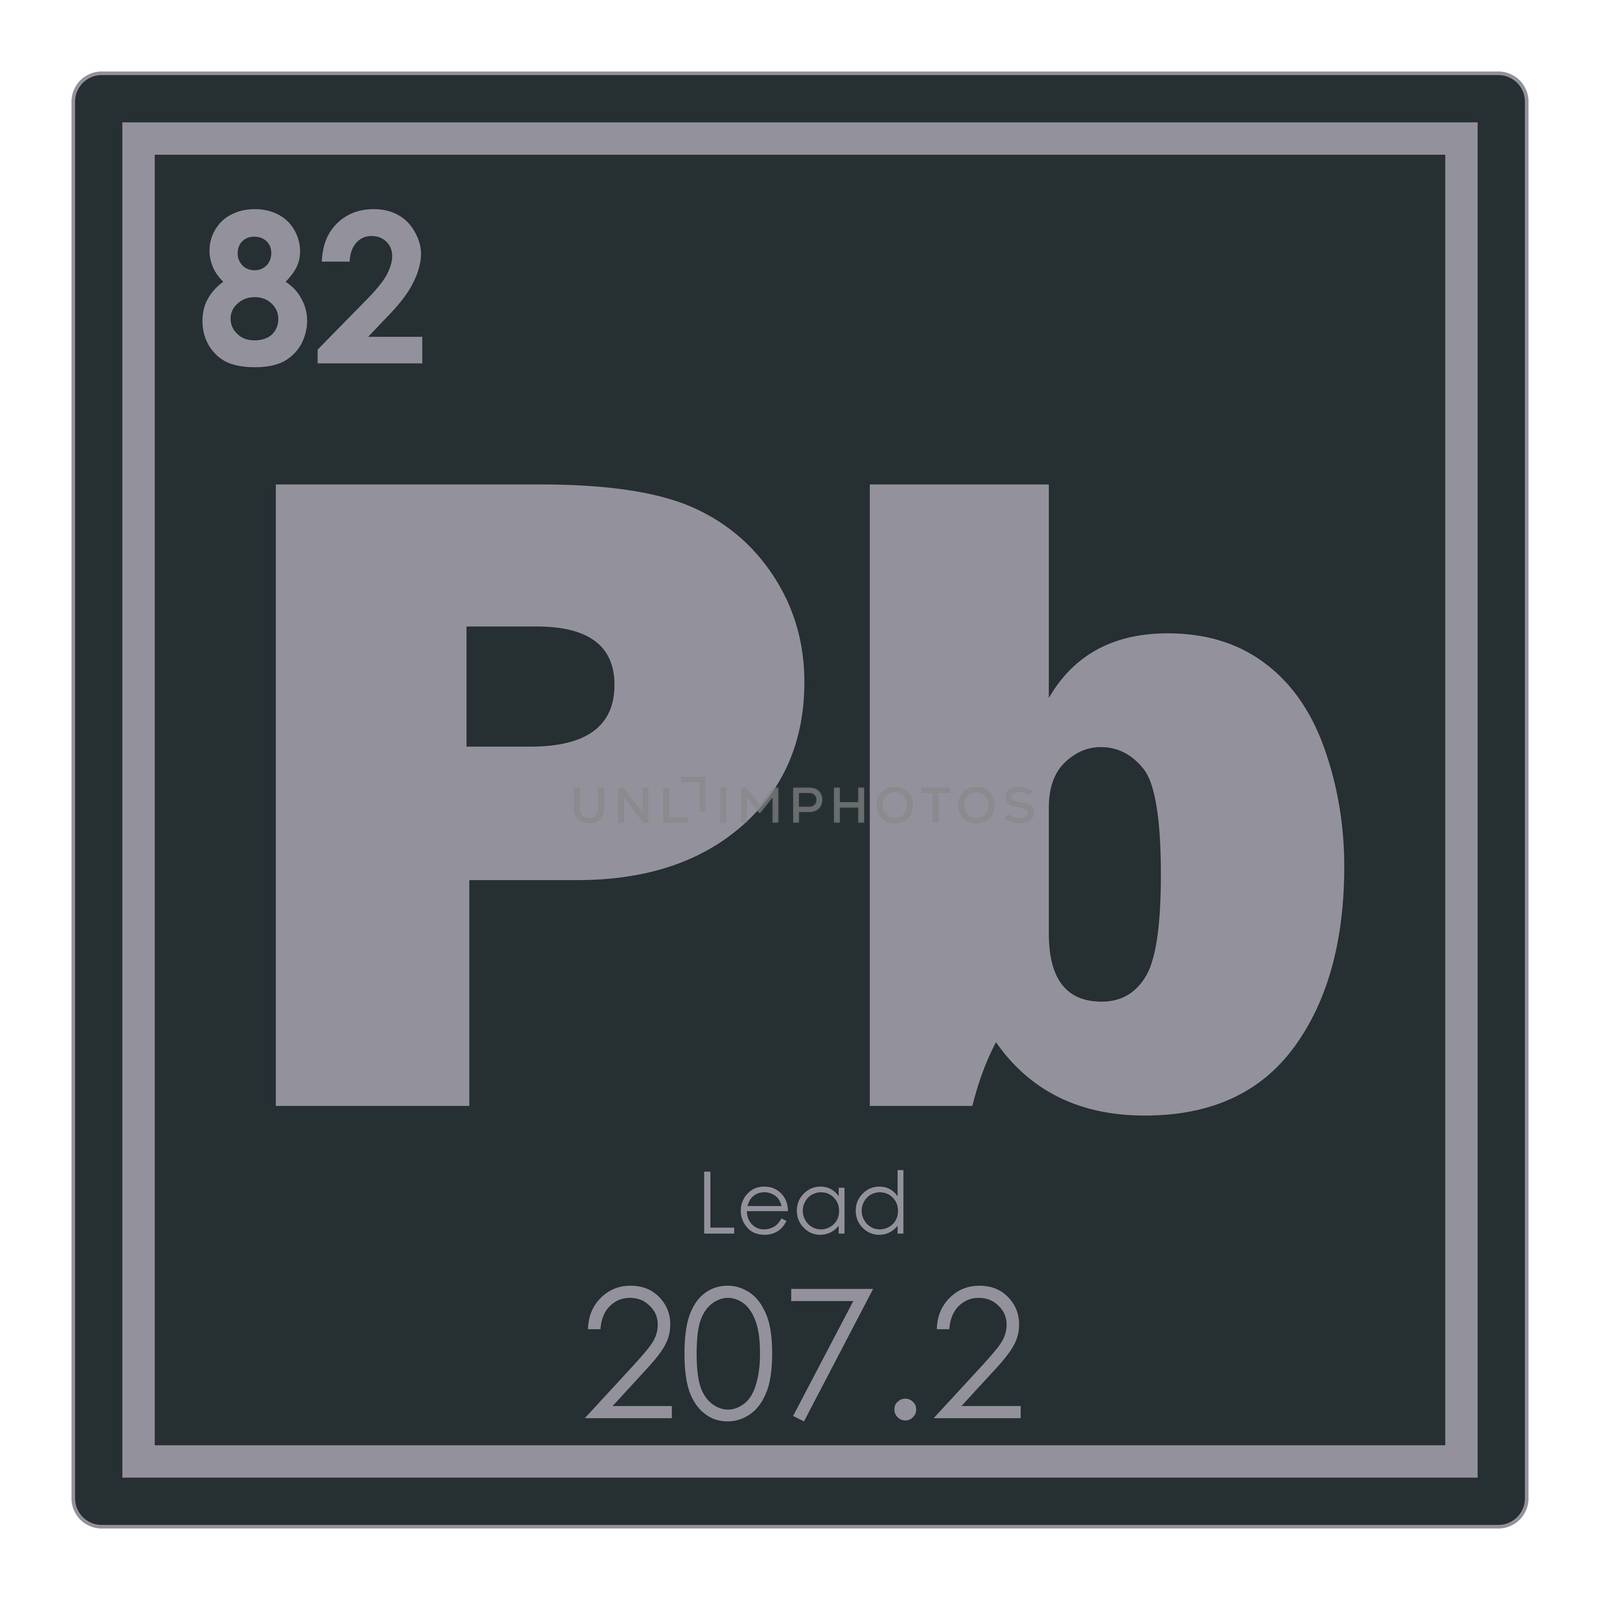 Lead chemical element periodic table science symbol